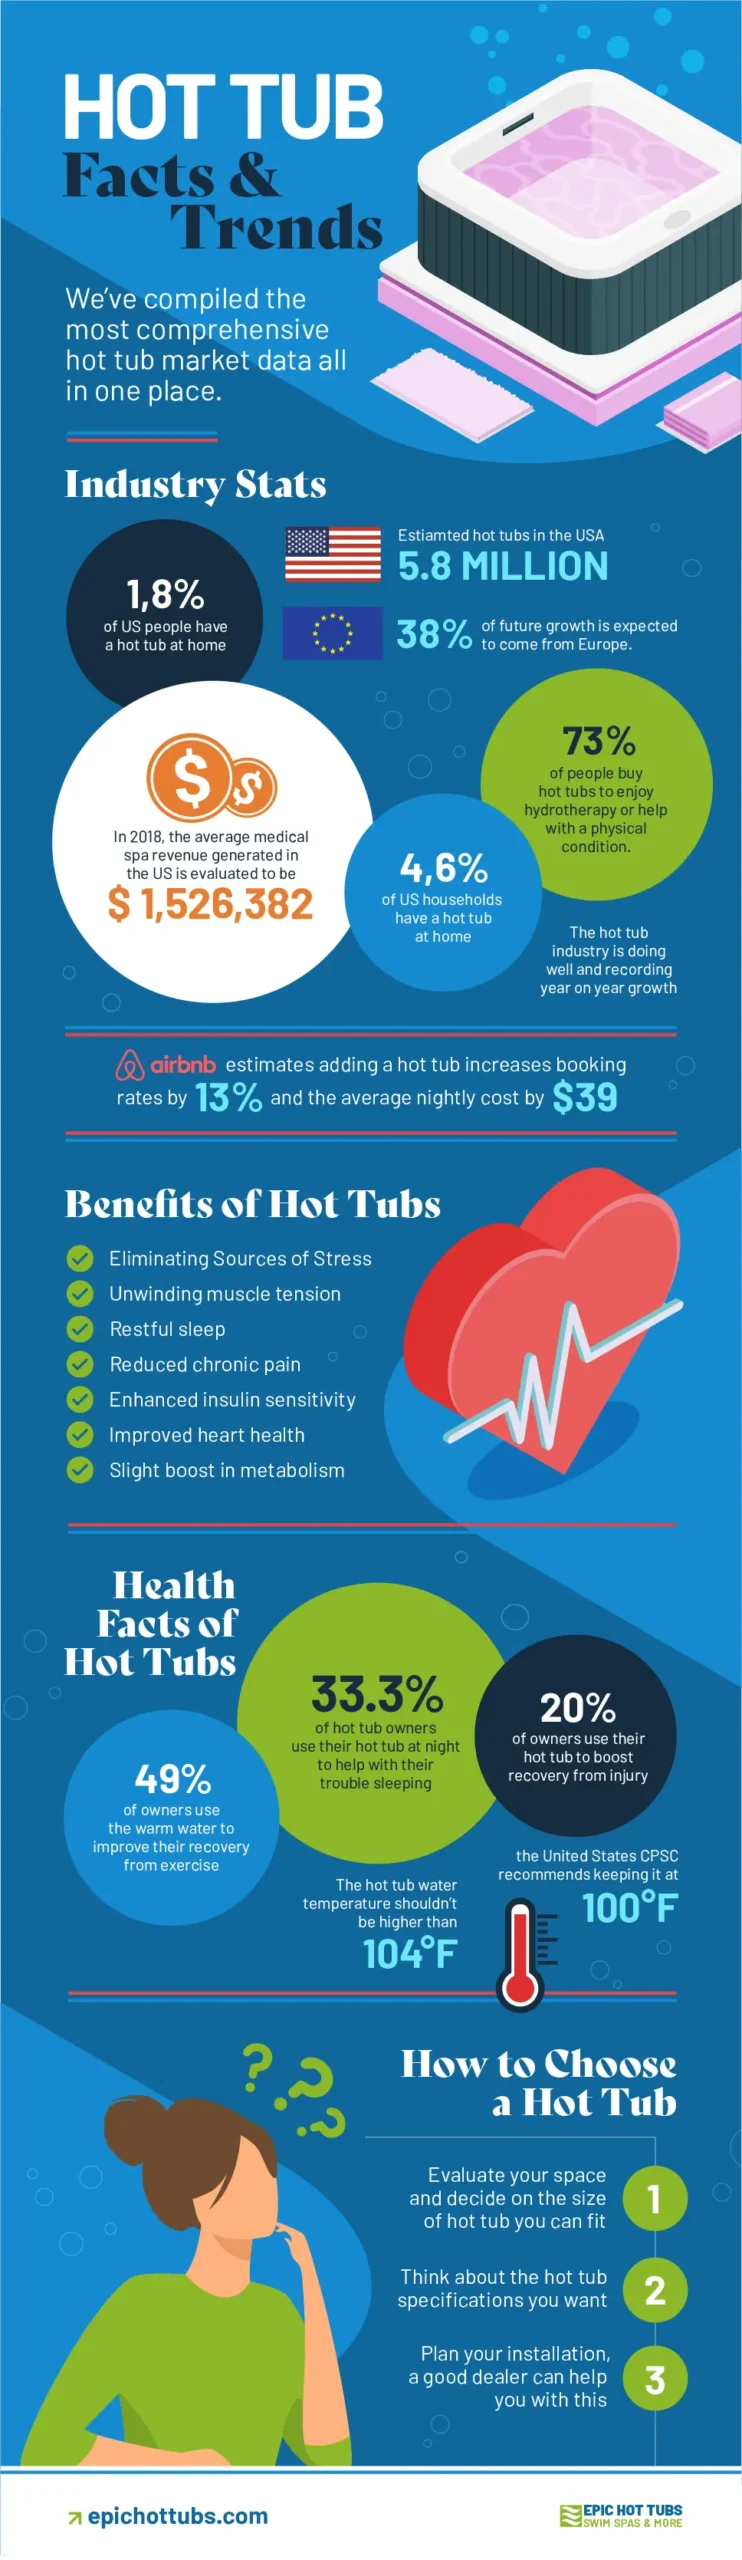 Hot Tub Facts & Trends Infographic